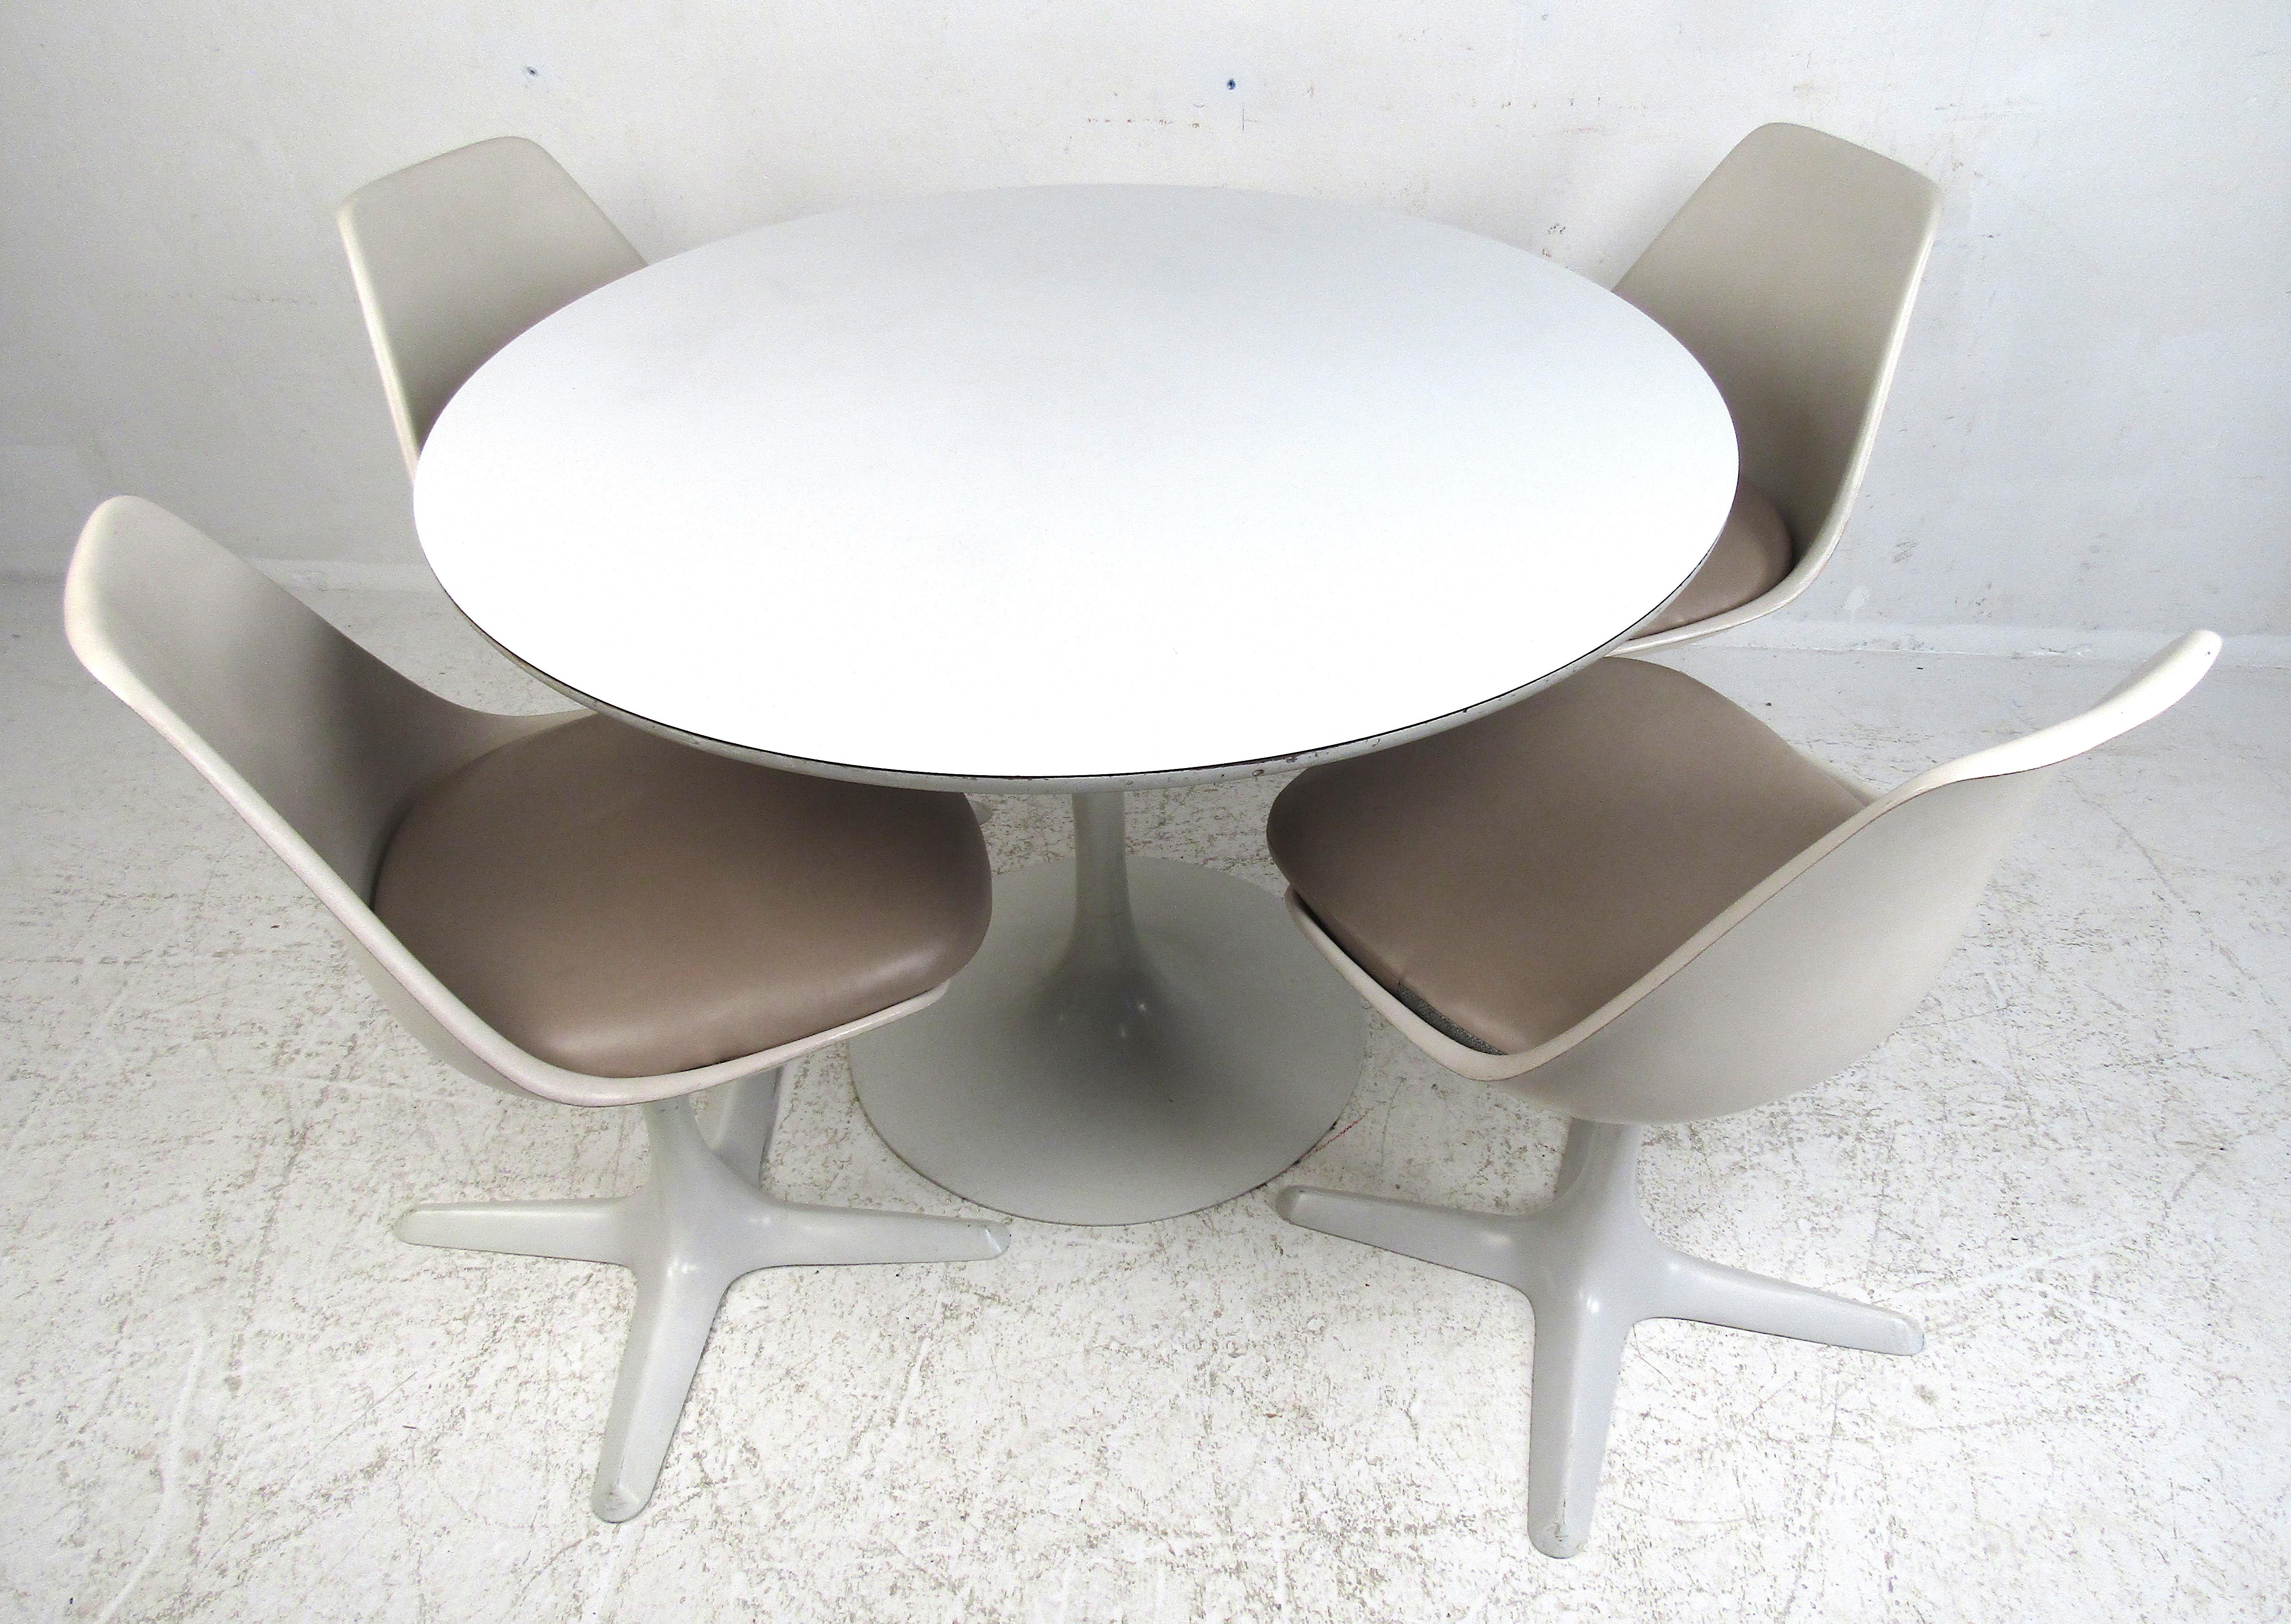 Modeled after Saarinen's Tulip series of tables and chairs, the Arkana chair was designed by Maurice Burke in 1965 for the Arkana company in England. It features the classic hourglass shape and fiberglass seat with a 4 legged base.
The accompanying